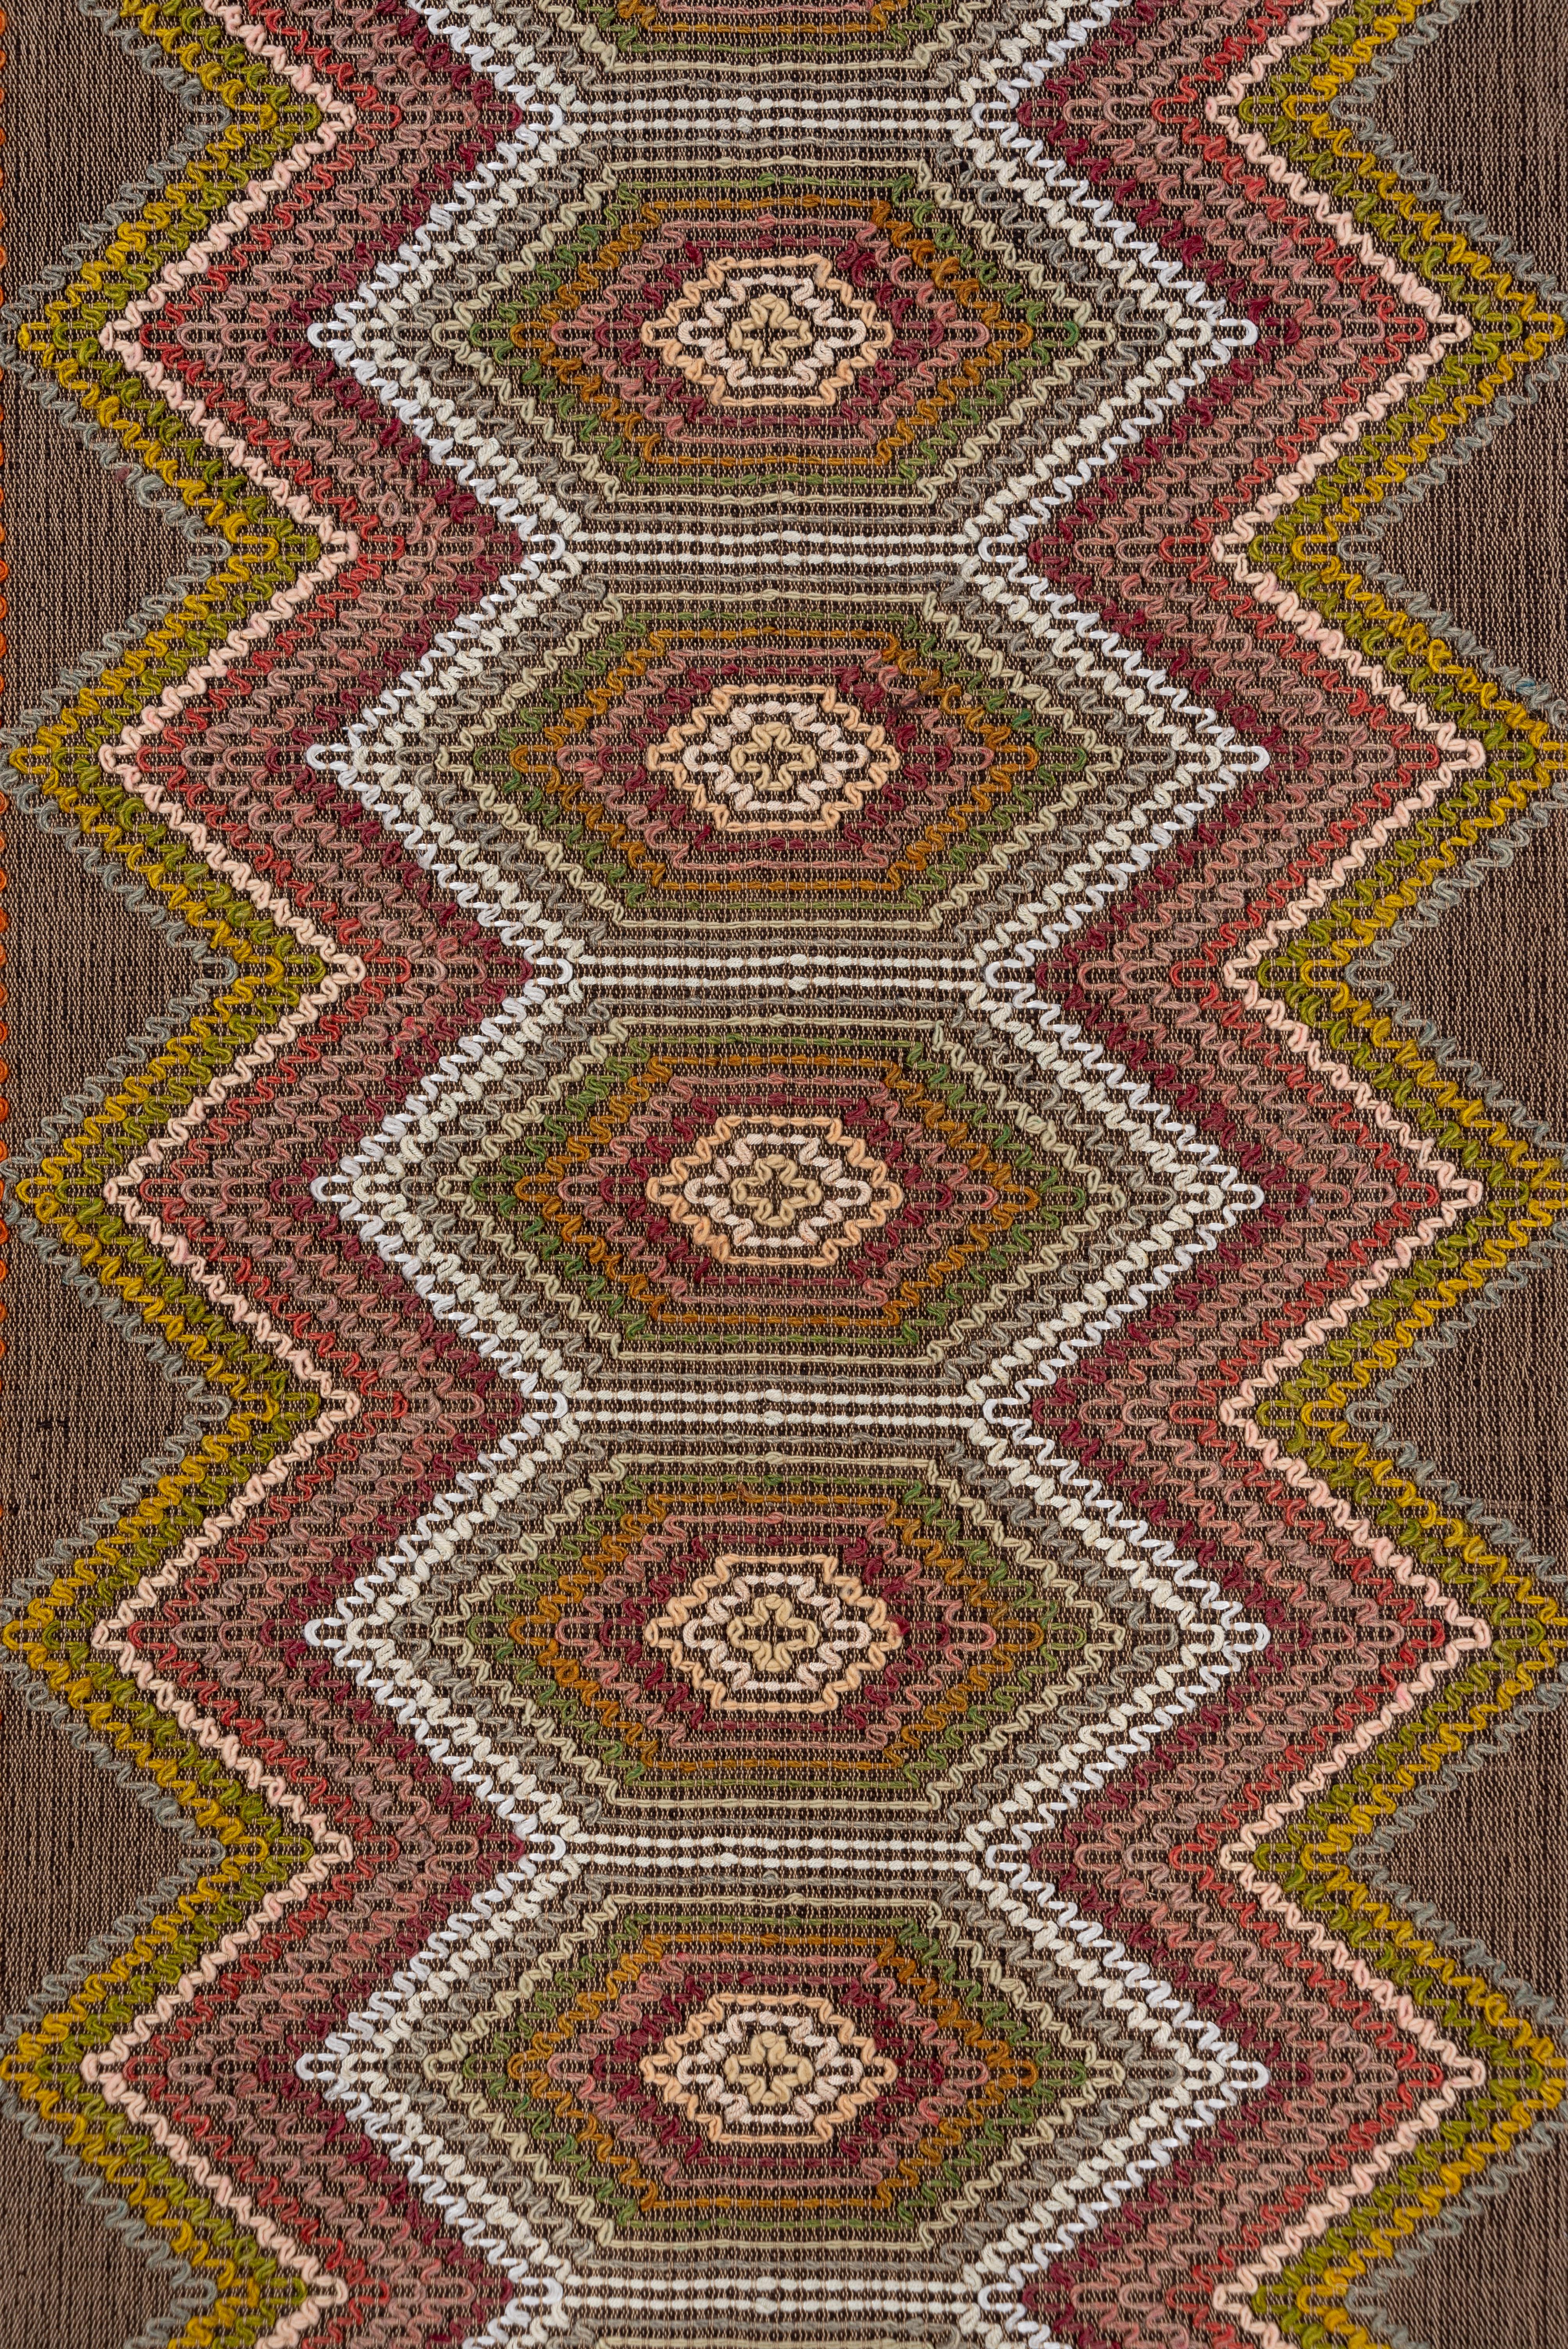 This interesting piece combines a balanced warp/weft ground with a squiggle effect produced by couching yarns or braided cords to make a field design of connected hexagons and a border of small diamonds. The palette includes dark brown warps and